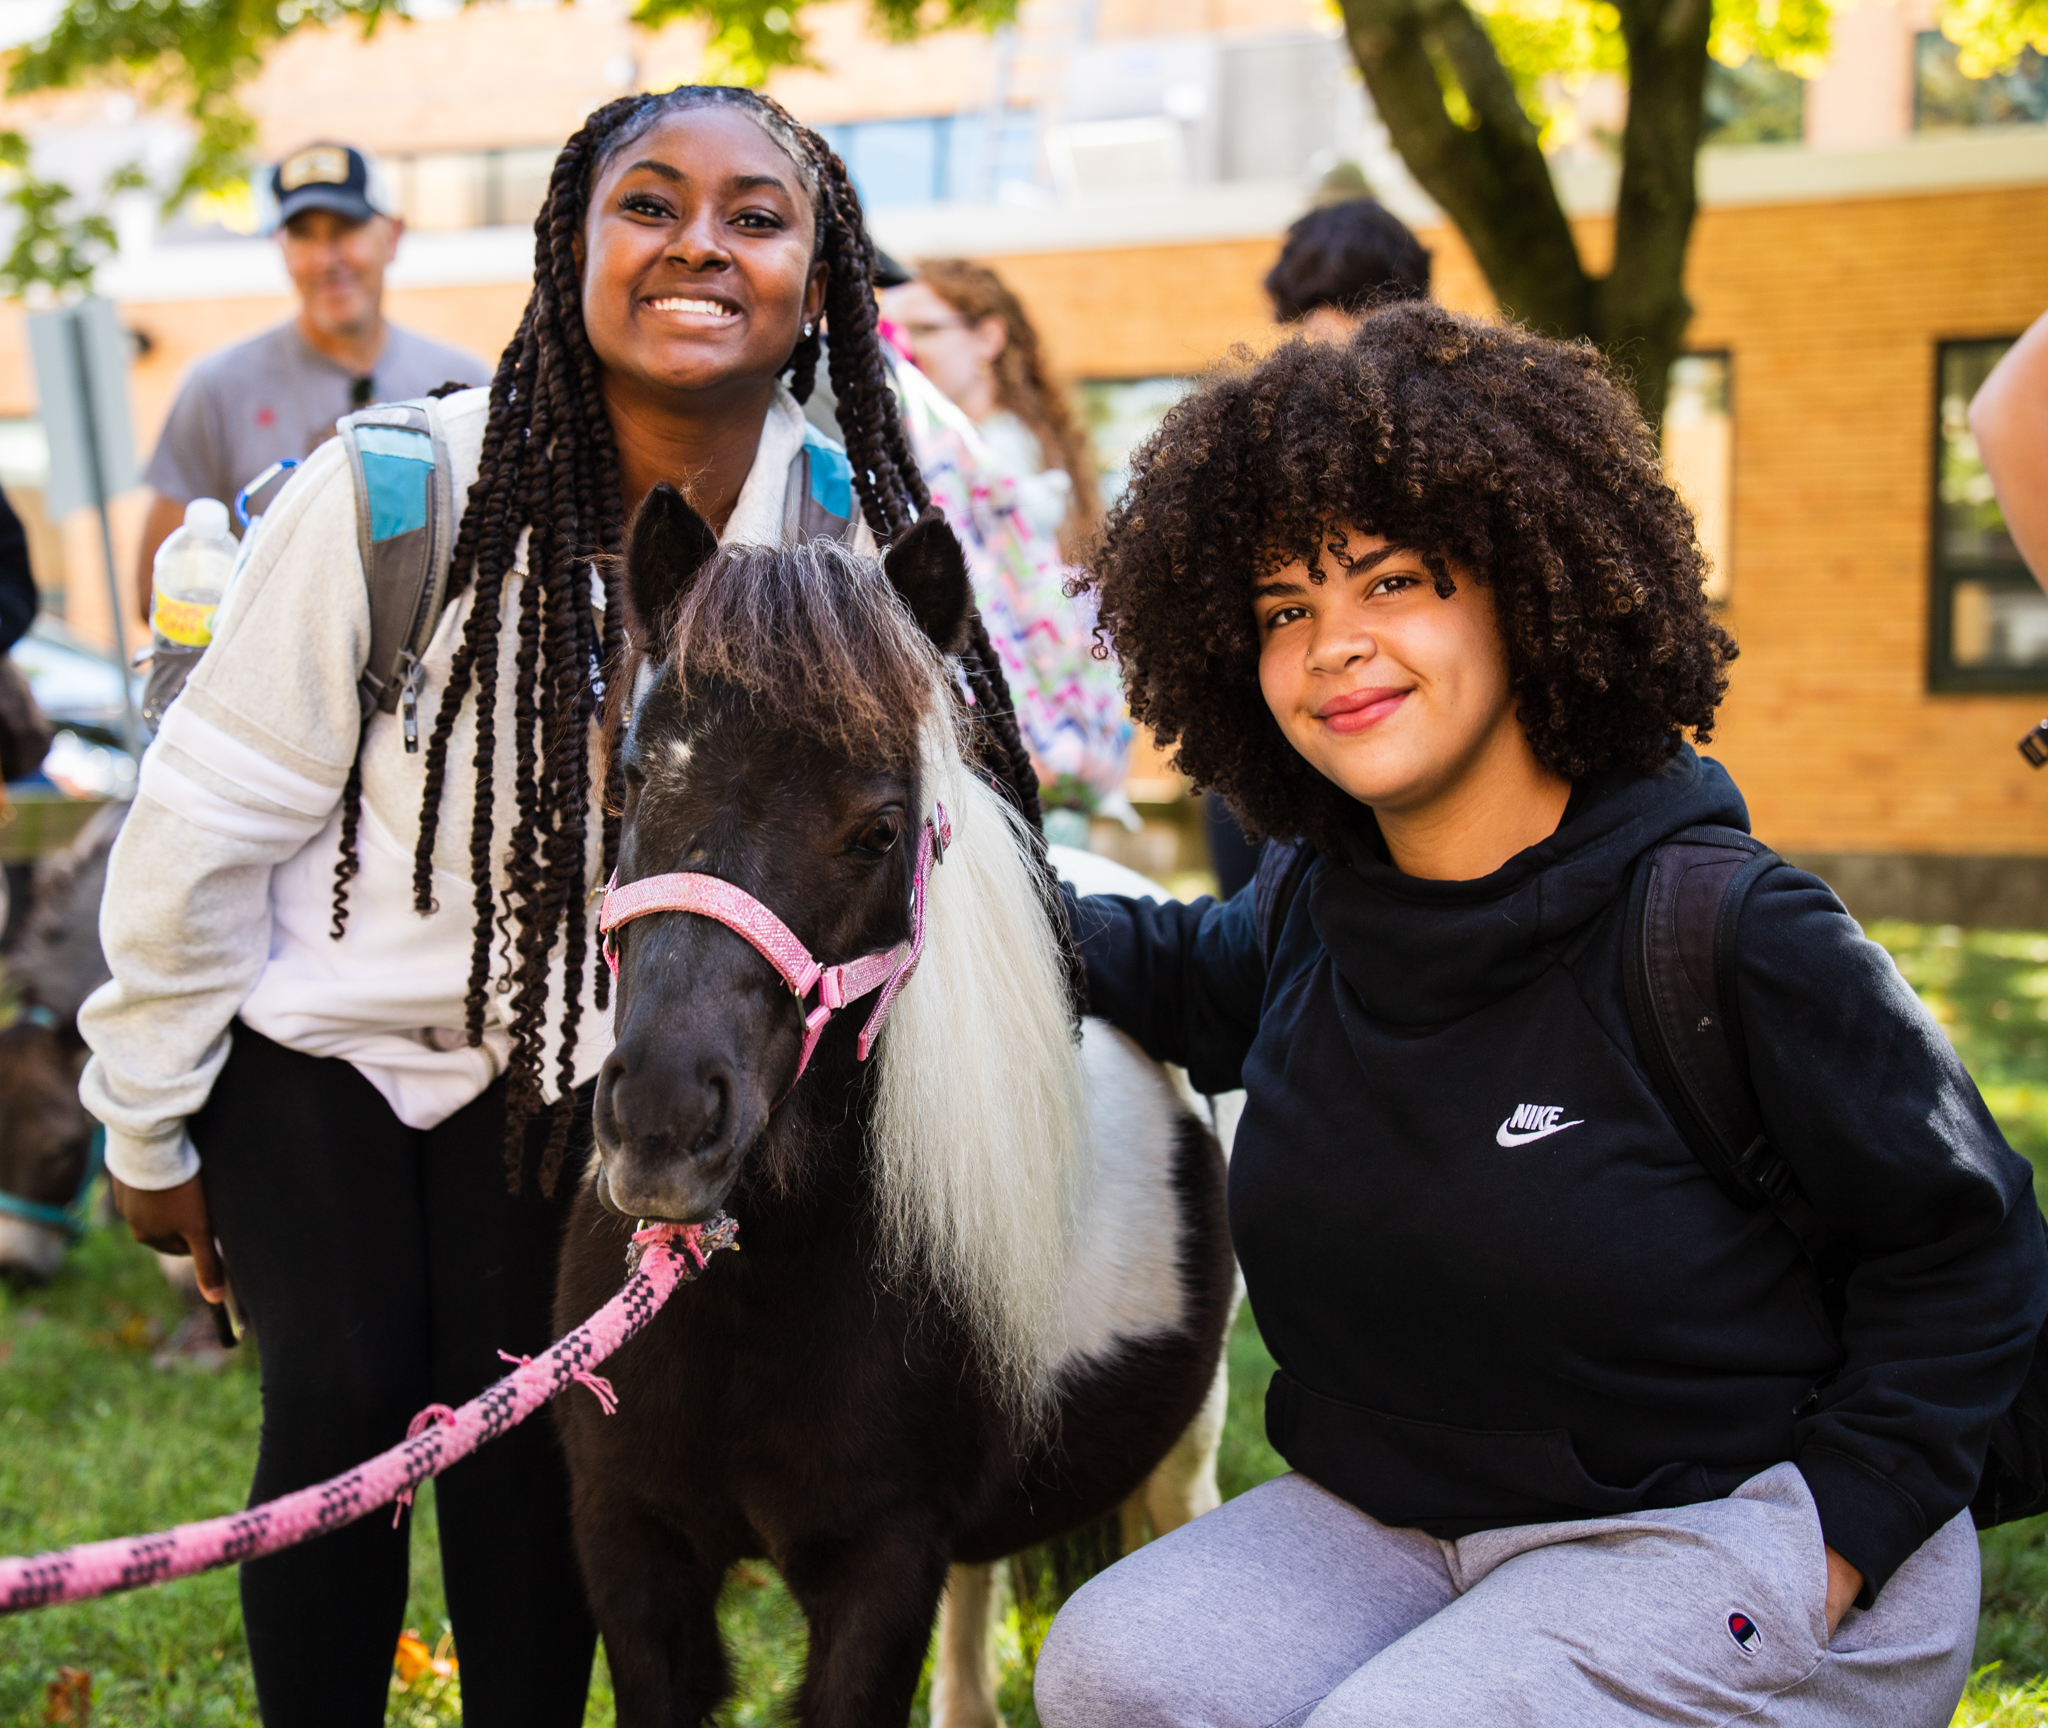 Two students pose with a miniature horse.